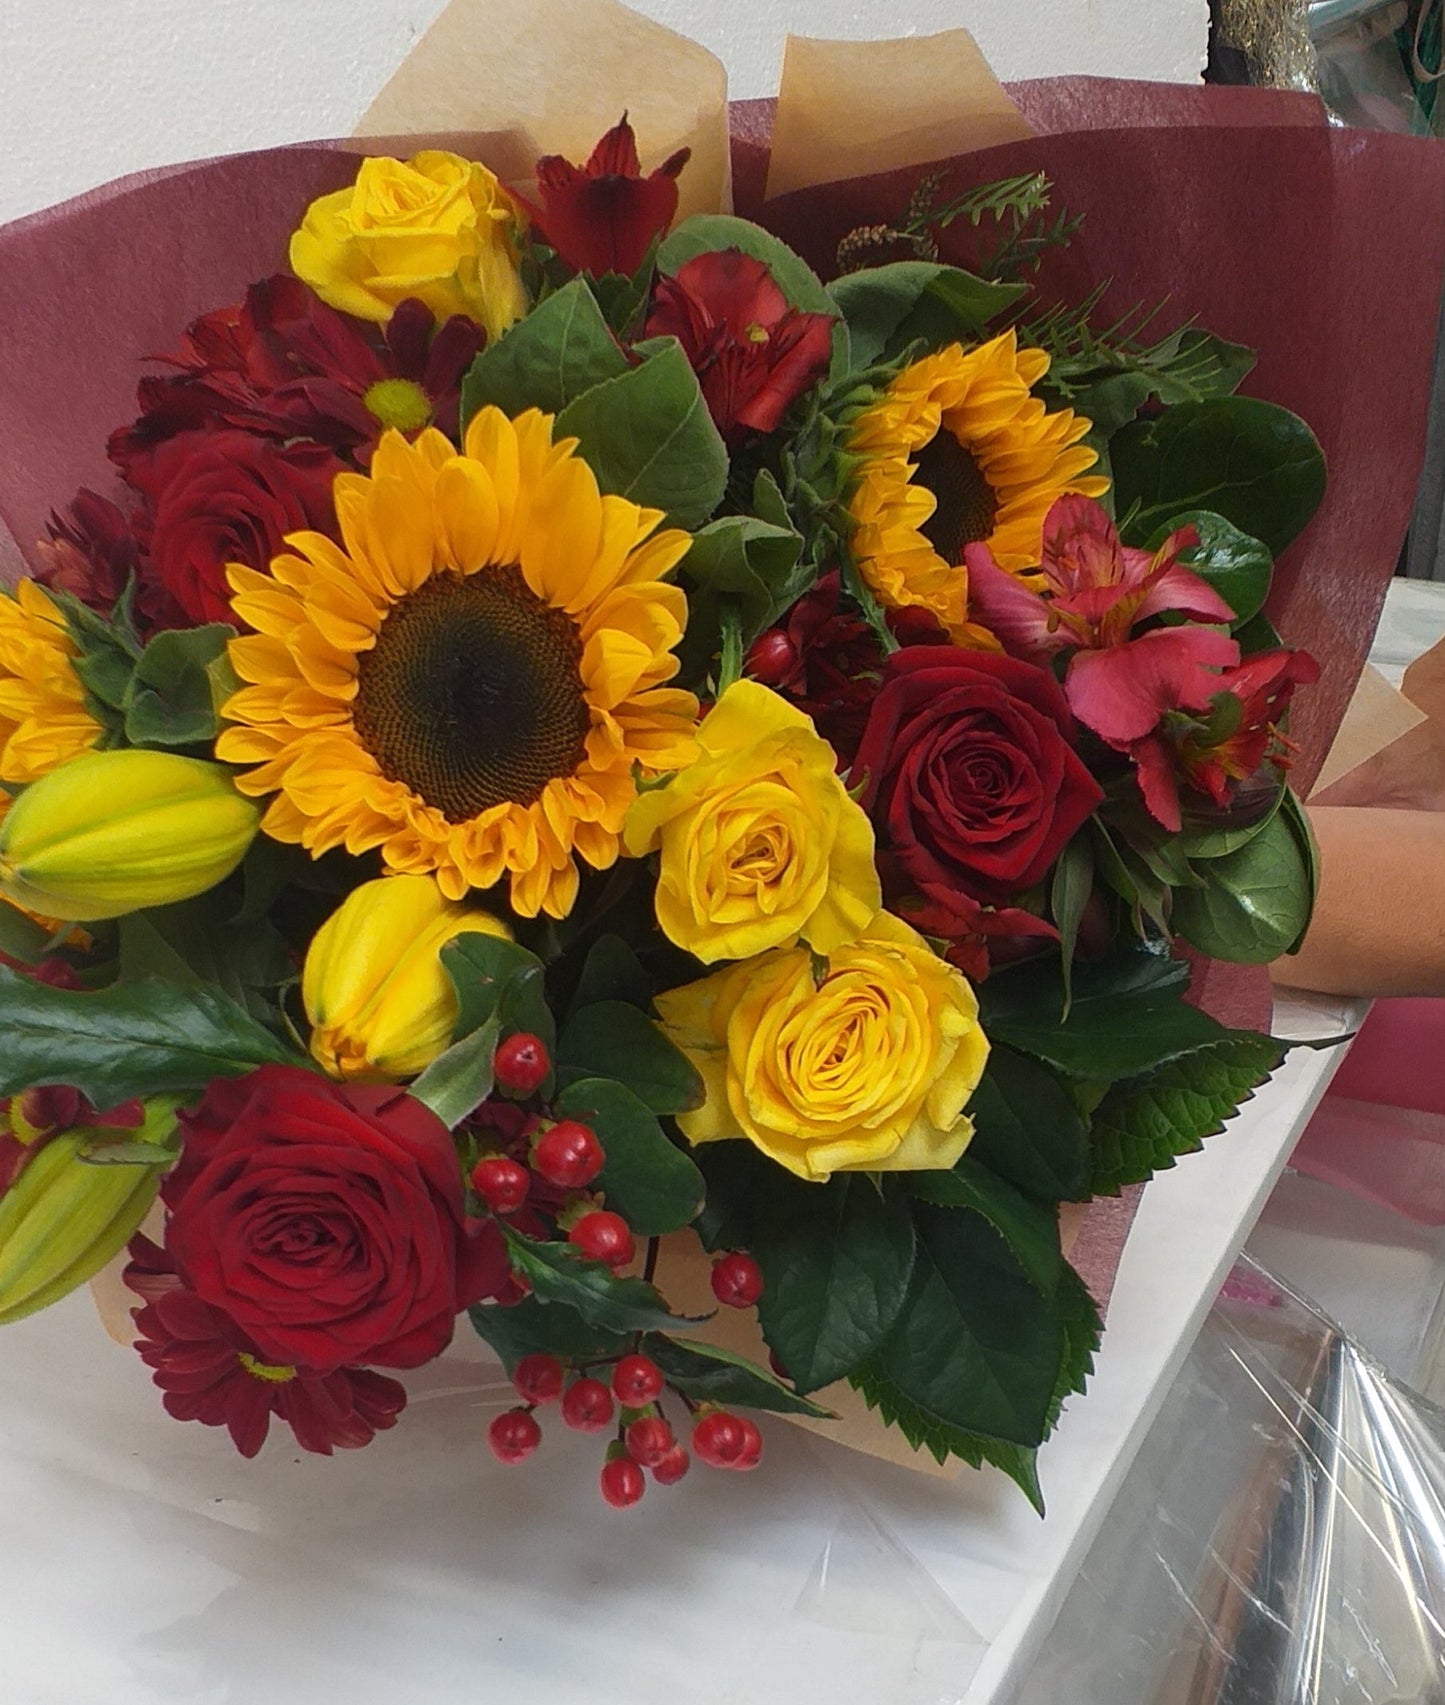 Flower Bouquet, Sunflowers and Roses or your choice - Broadfield Flowers Florist Lincoln